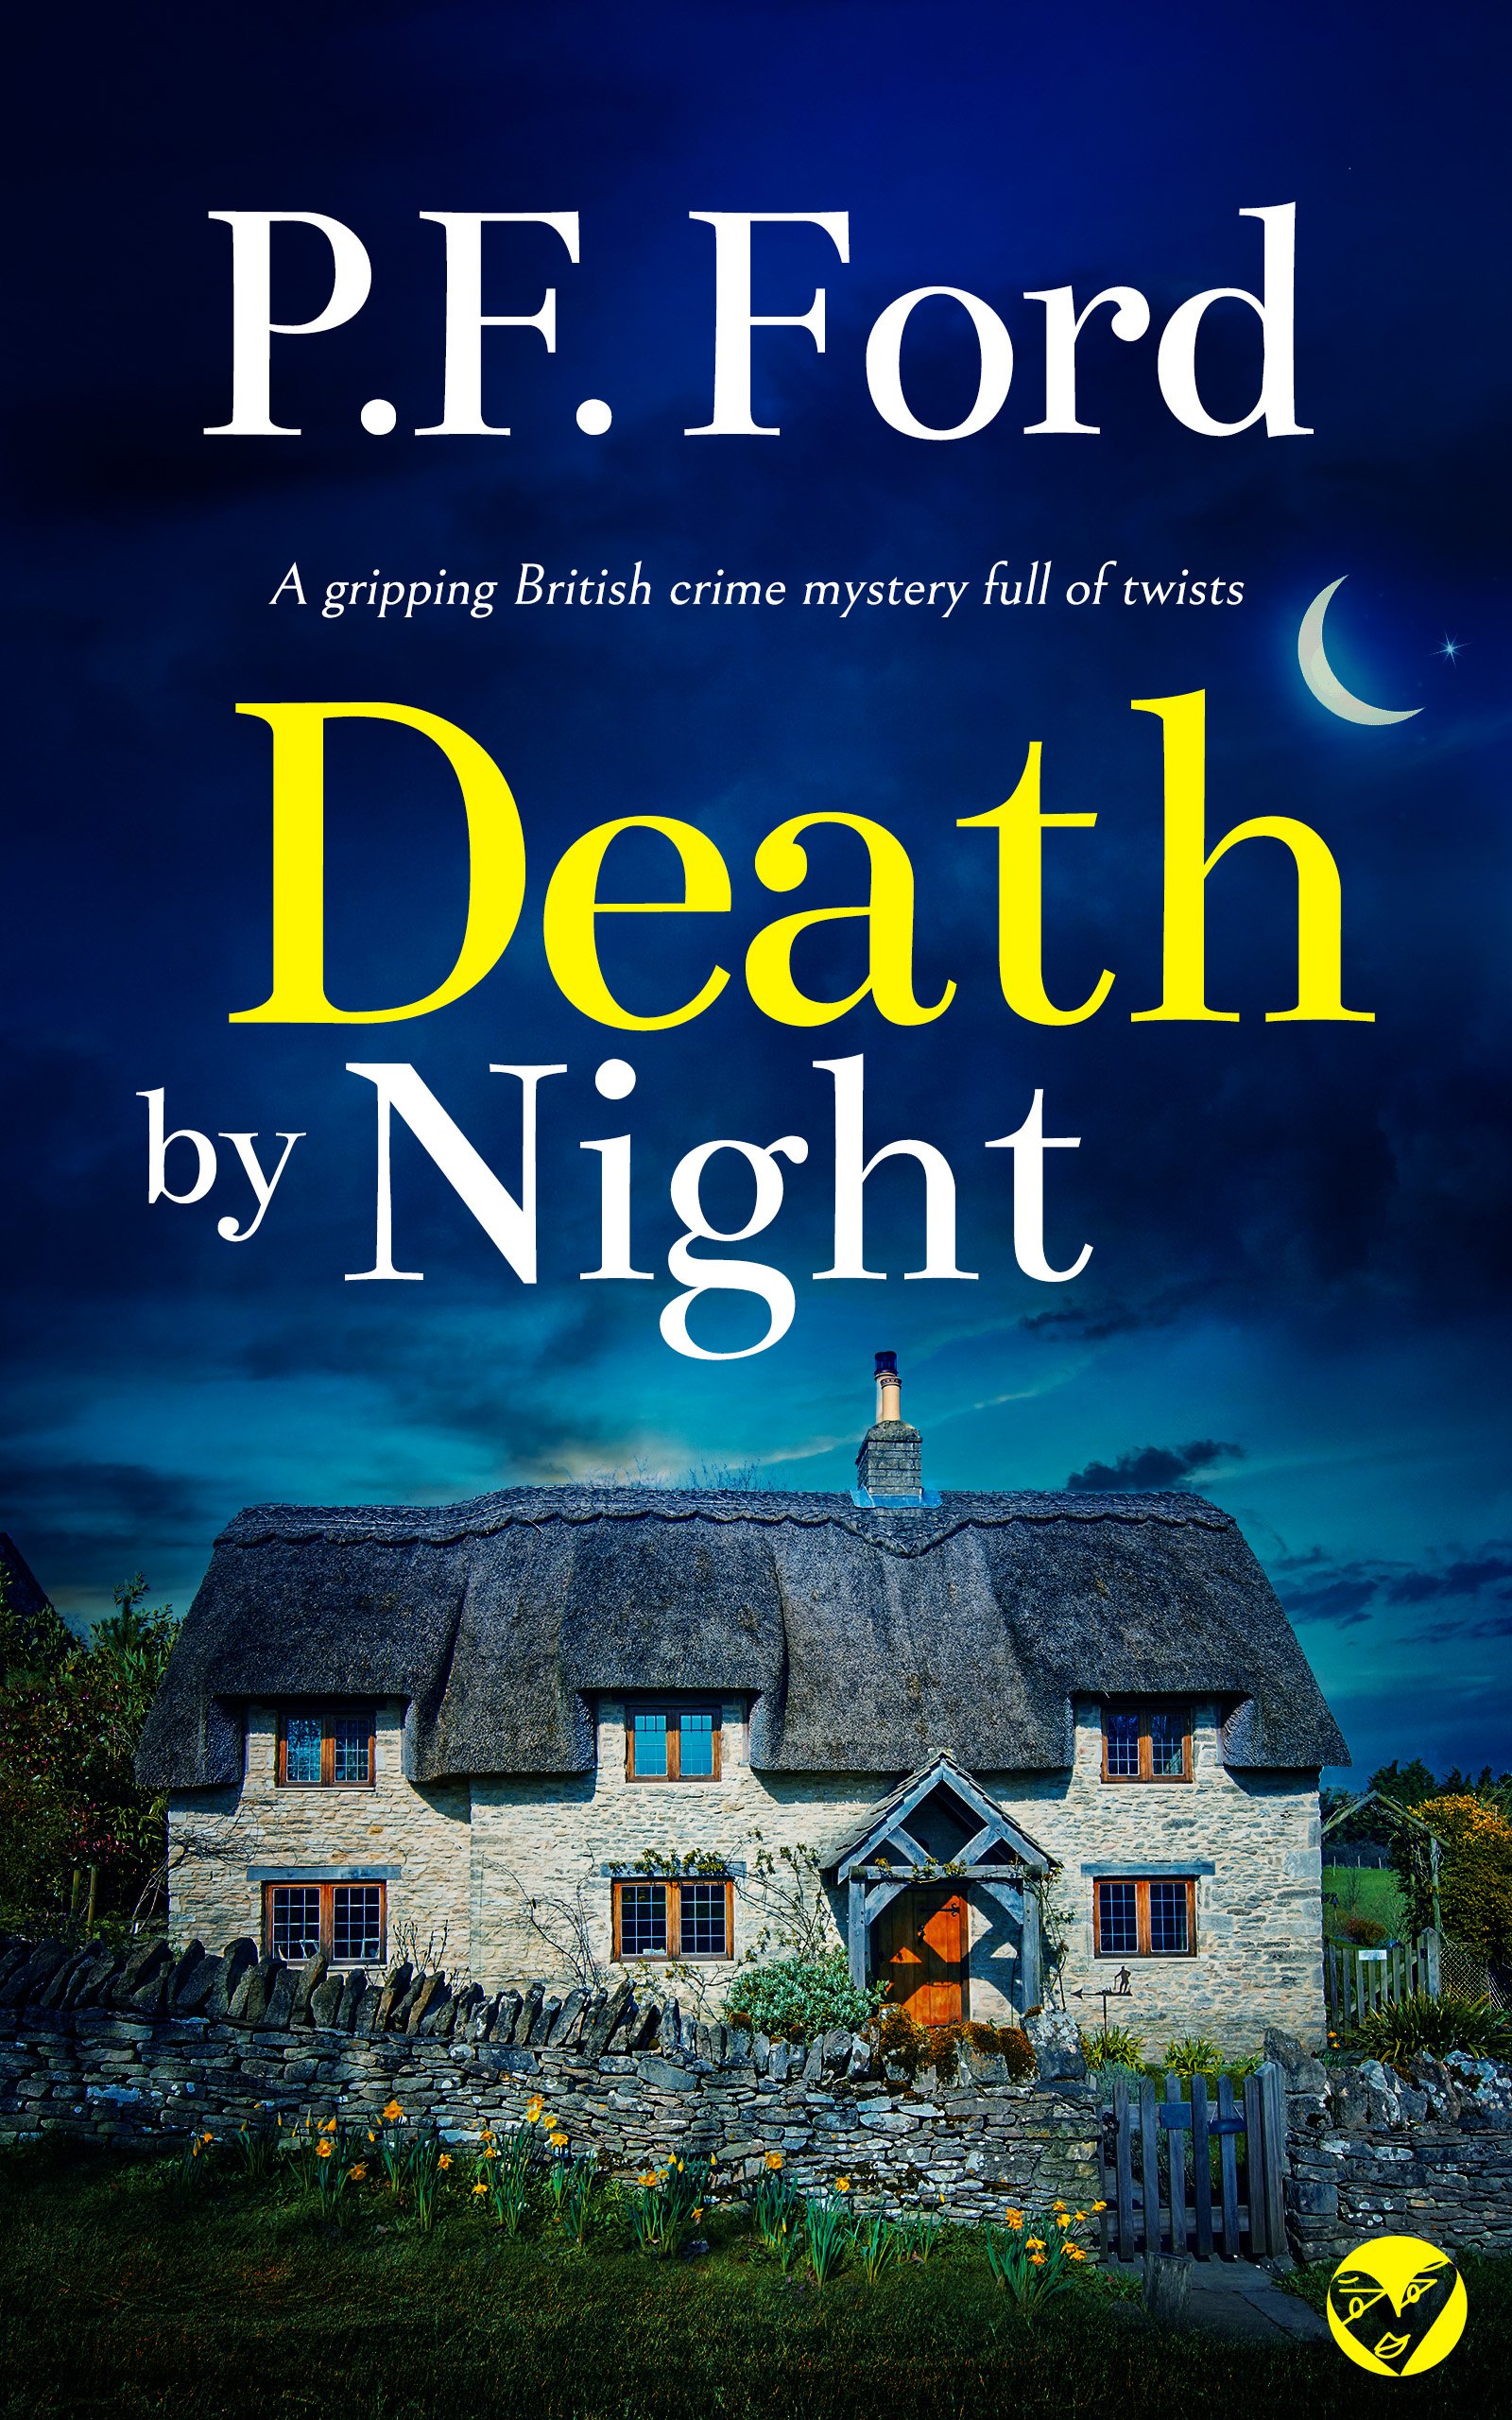 DEATH BY NIGHT cover publish.jpg